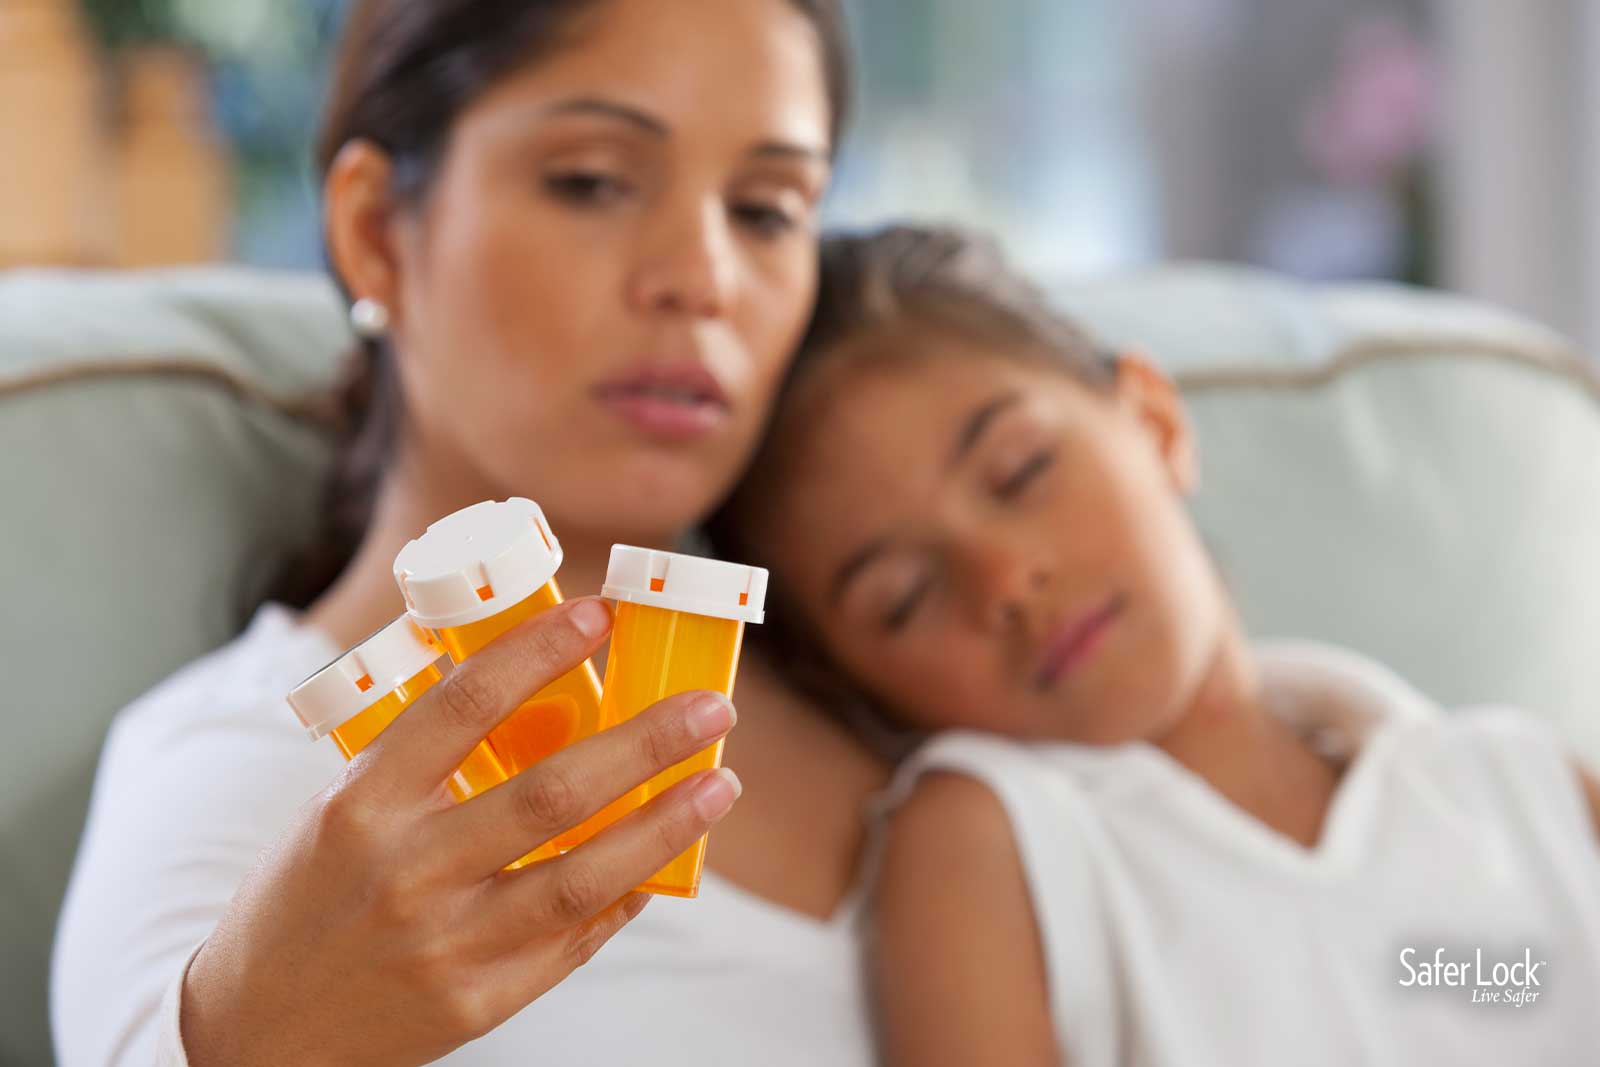 A worried mom holding her daughter looks at empty rx bottles. Find out how Safer Lock and Disposes Rx are protecting kids from medicine poisoning.